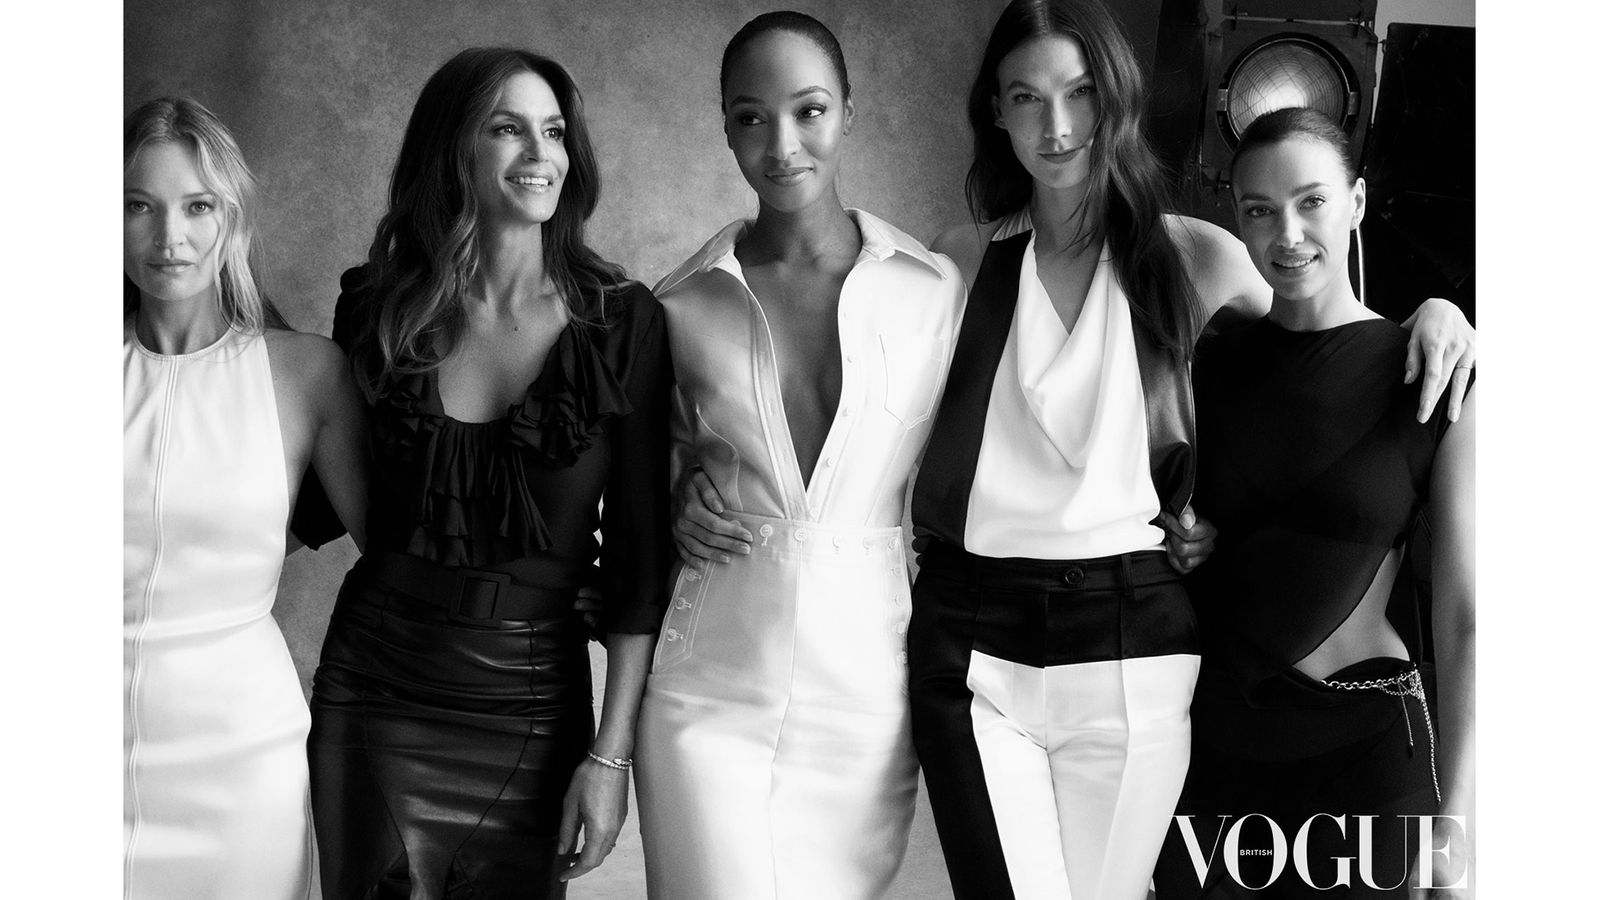 Vogue magazine: Serena Williams and Kate Moss among 40 famous women on Edward Enninful's final cover